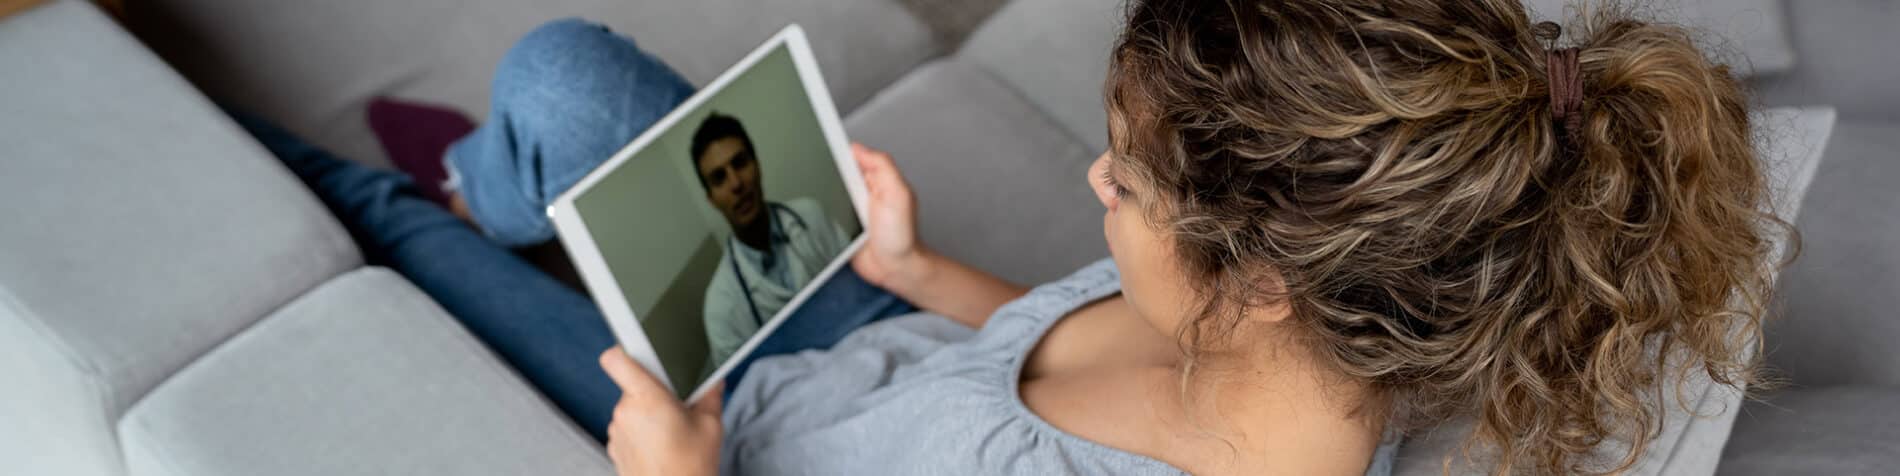 Is Telehealth the Solution? Reimagining Community Health Systems